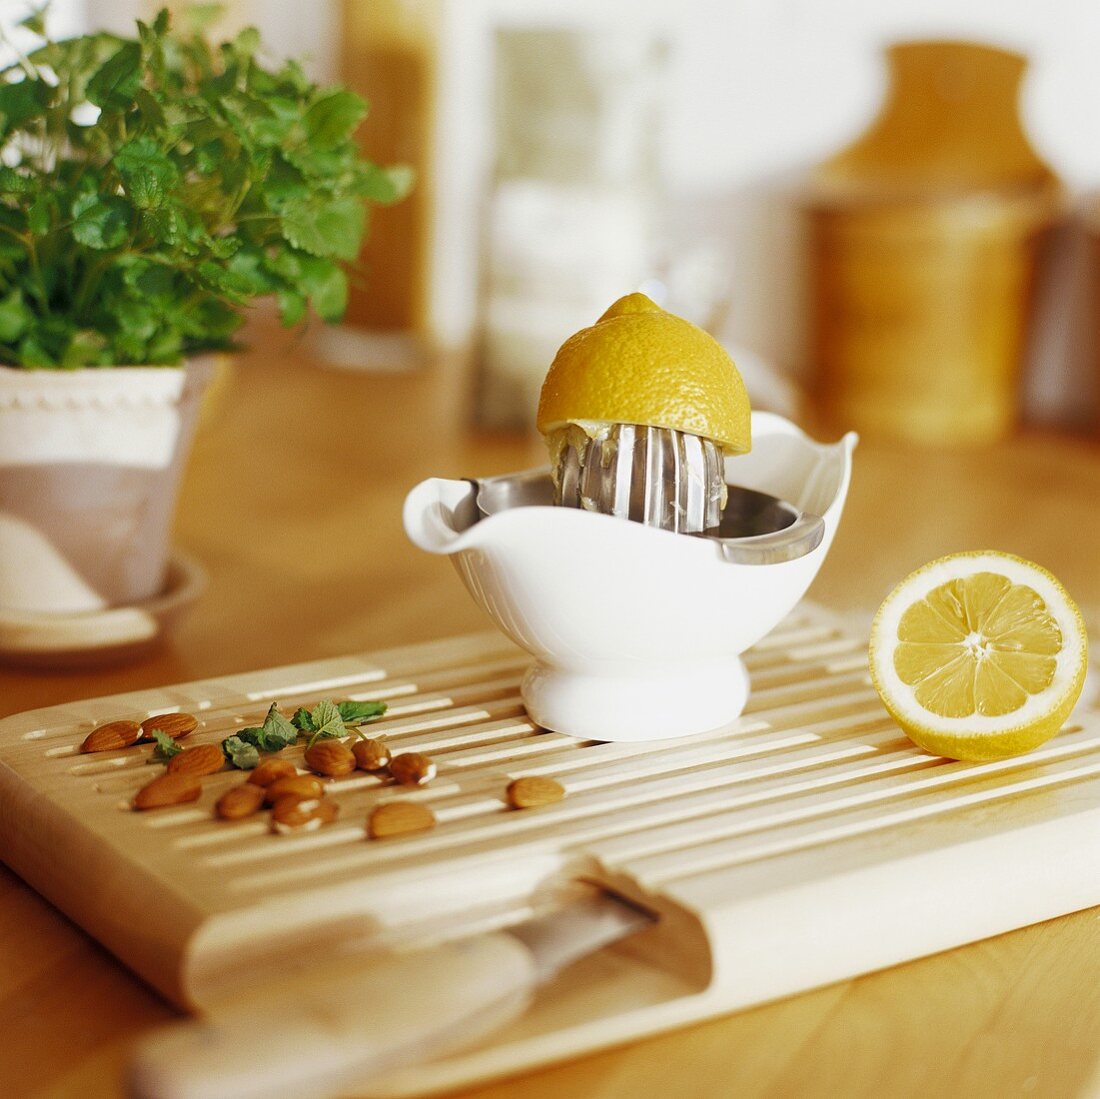 Lemon squeezer with lemon and almonds on a chopping board